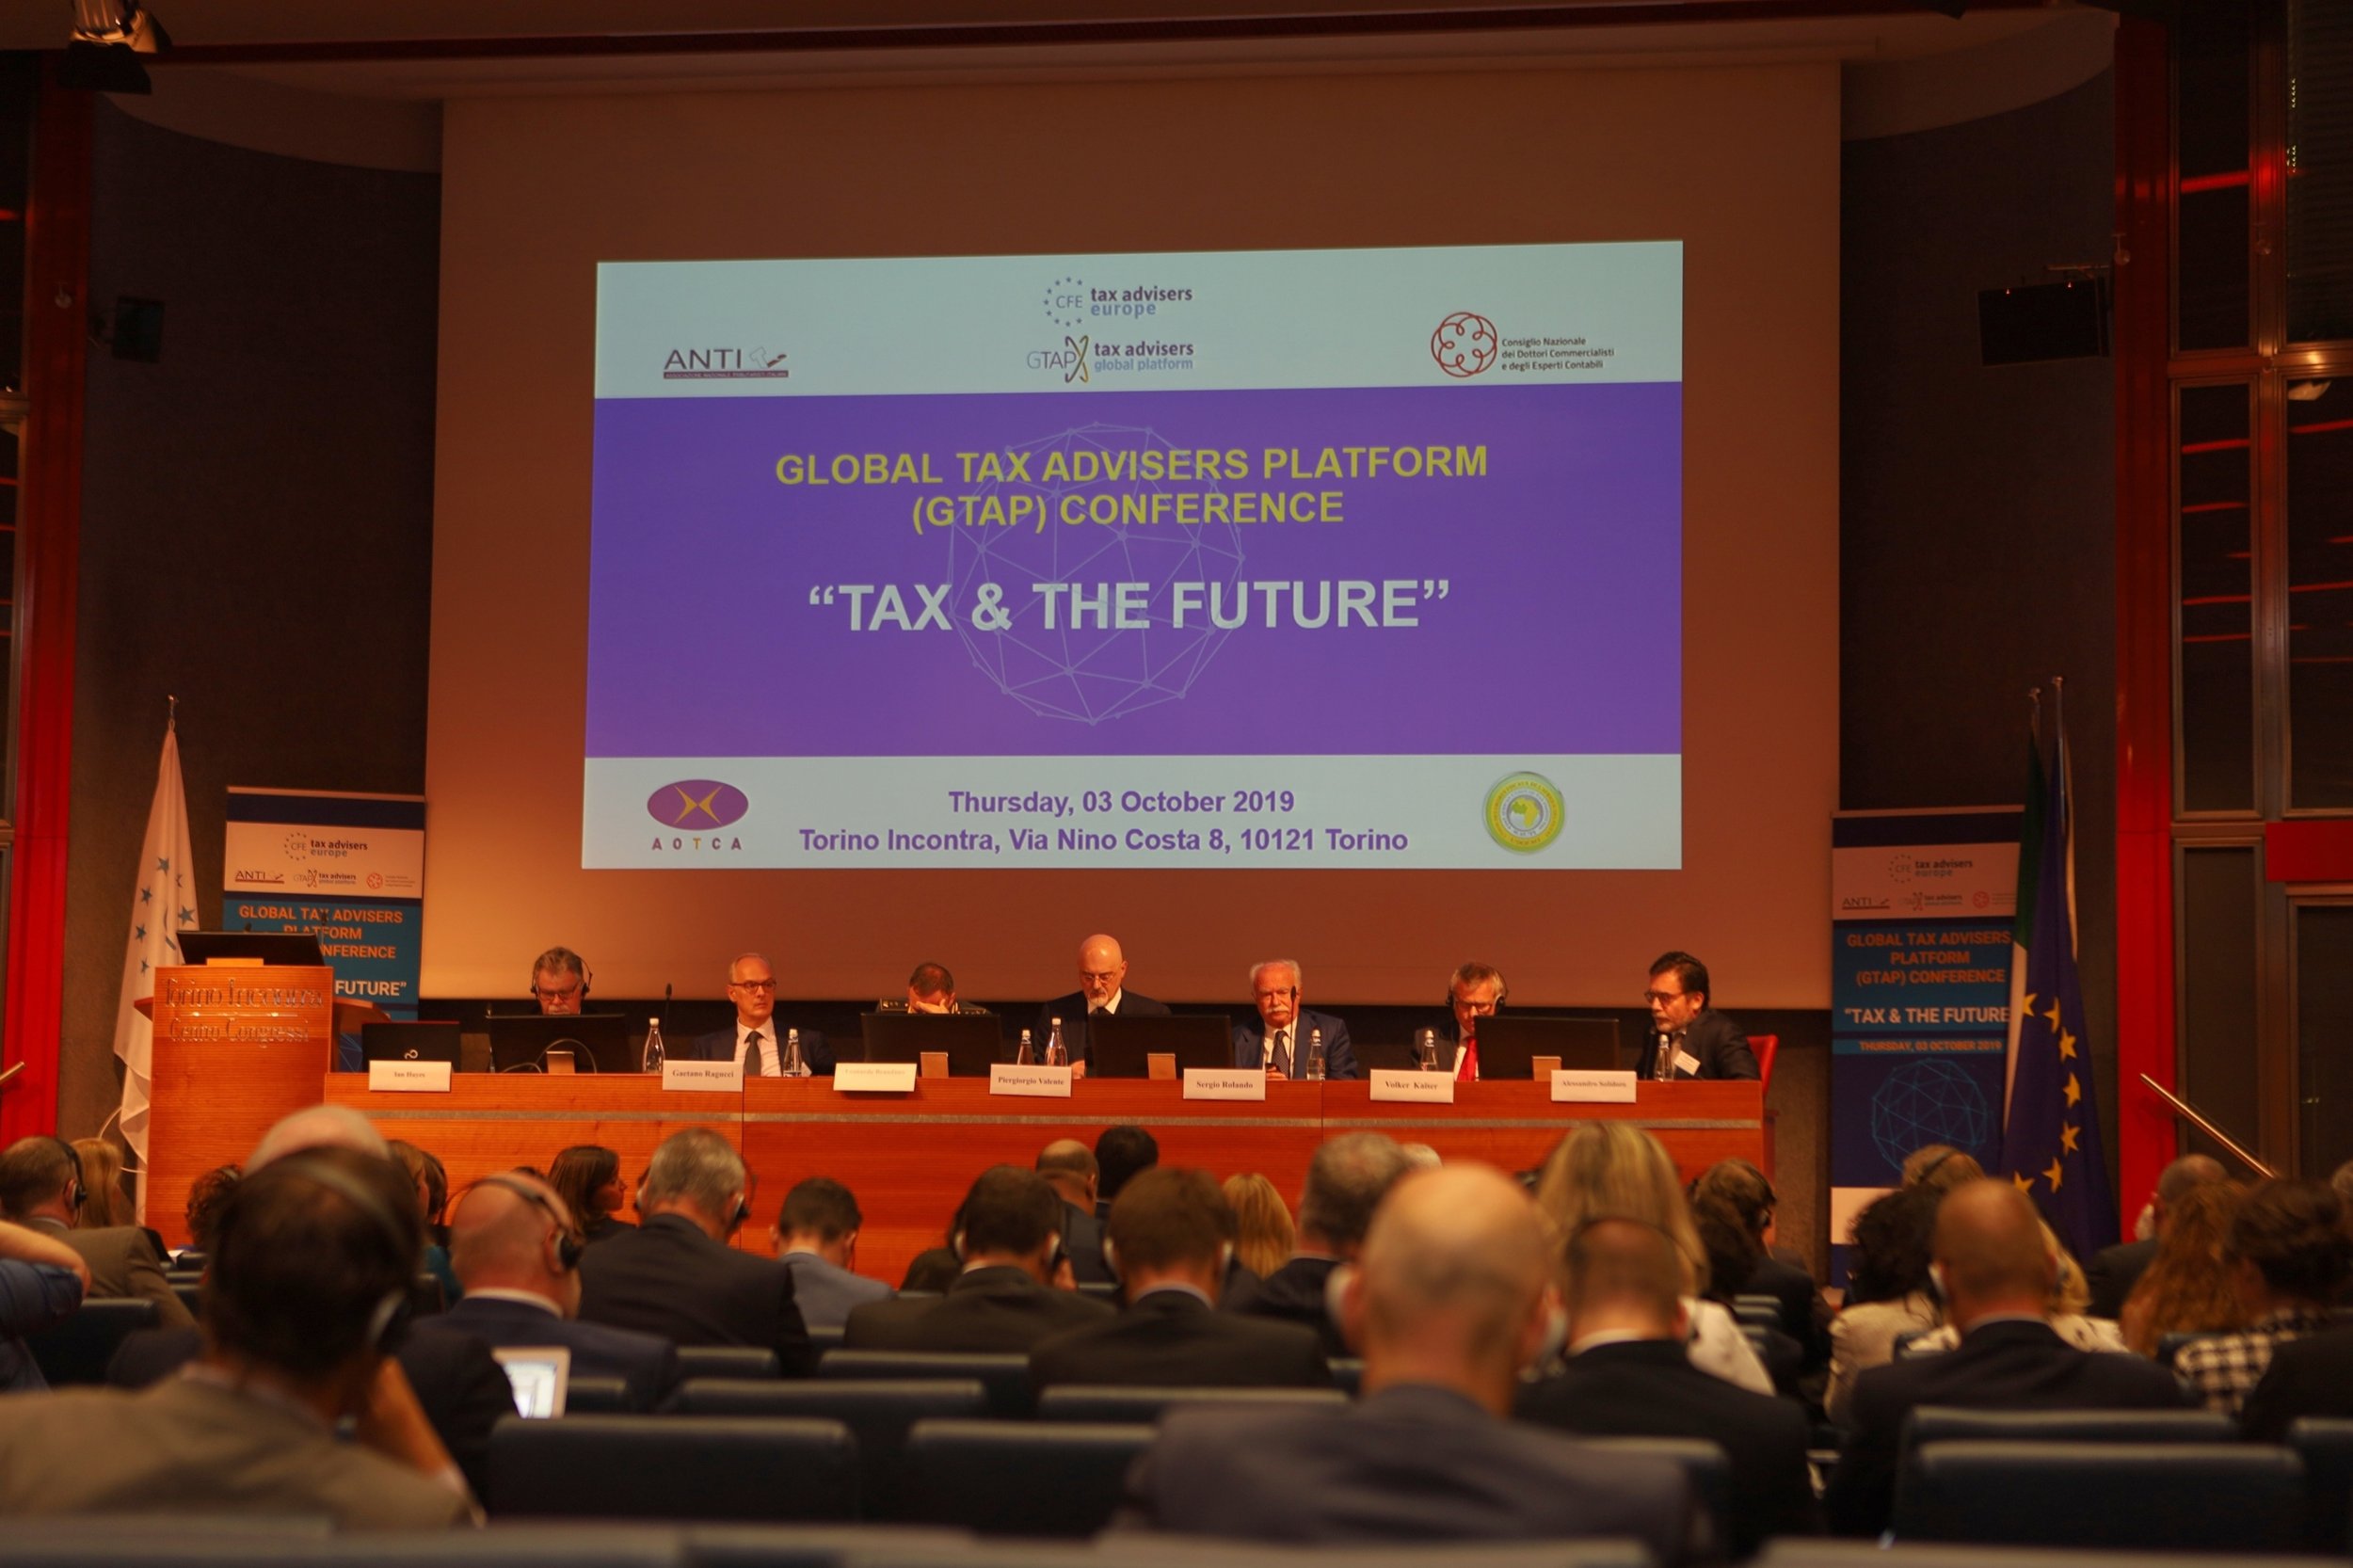 gtap-conference-on-03-october-2019-in-torino_48903193773_o.jpg